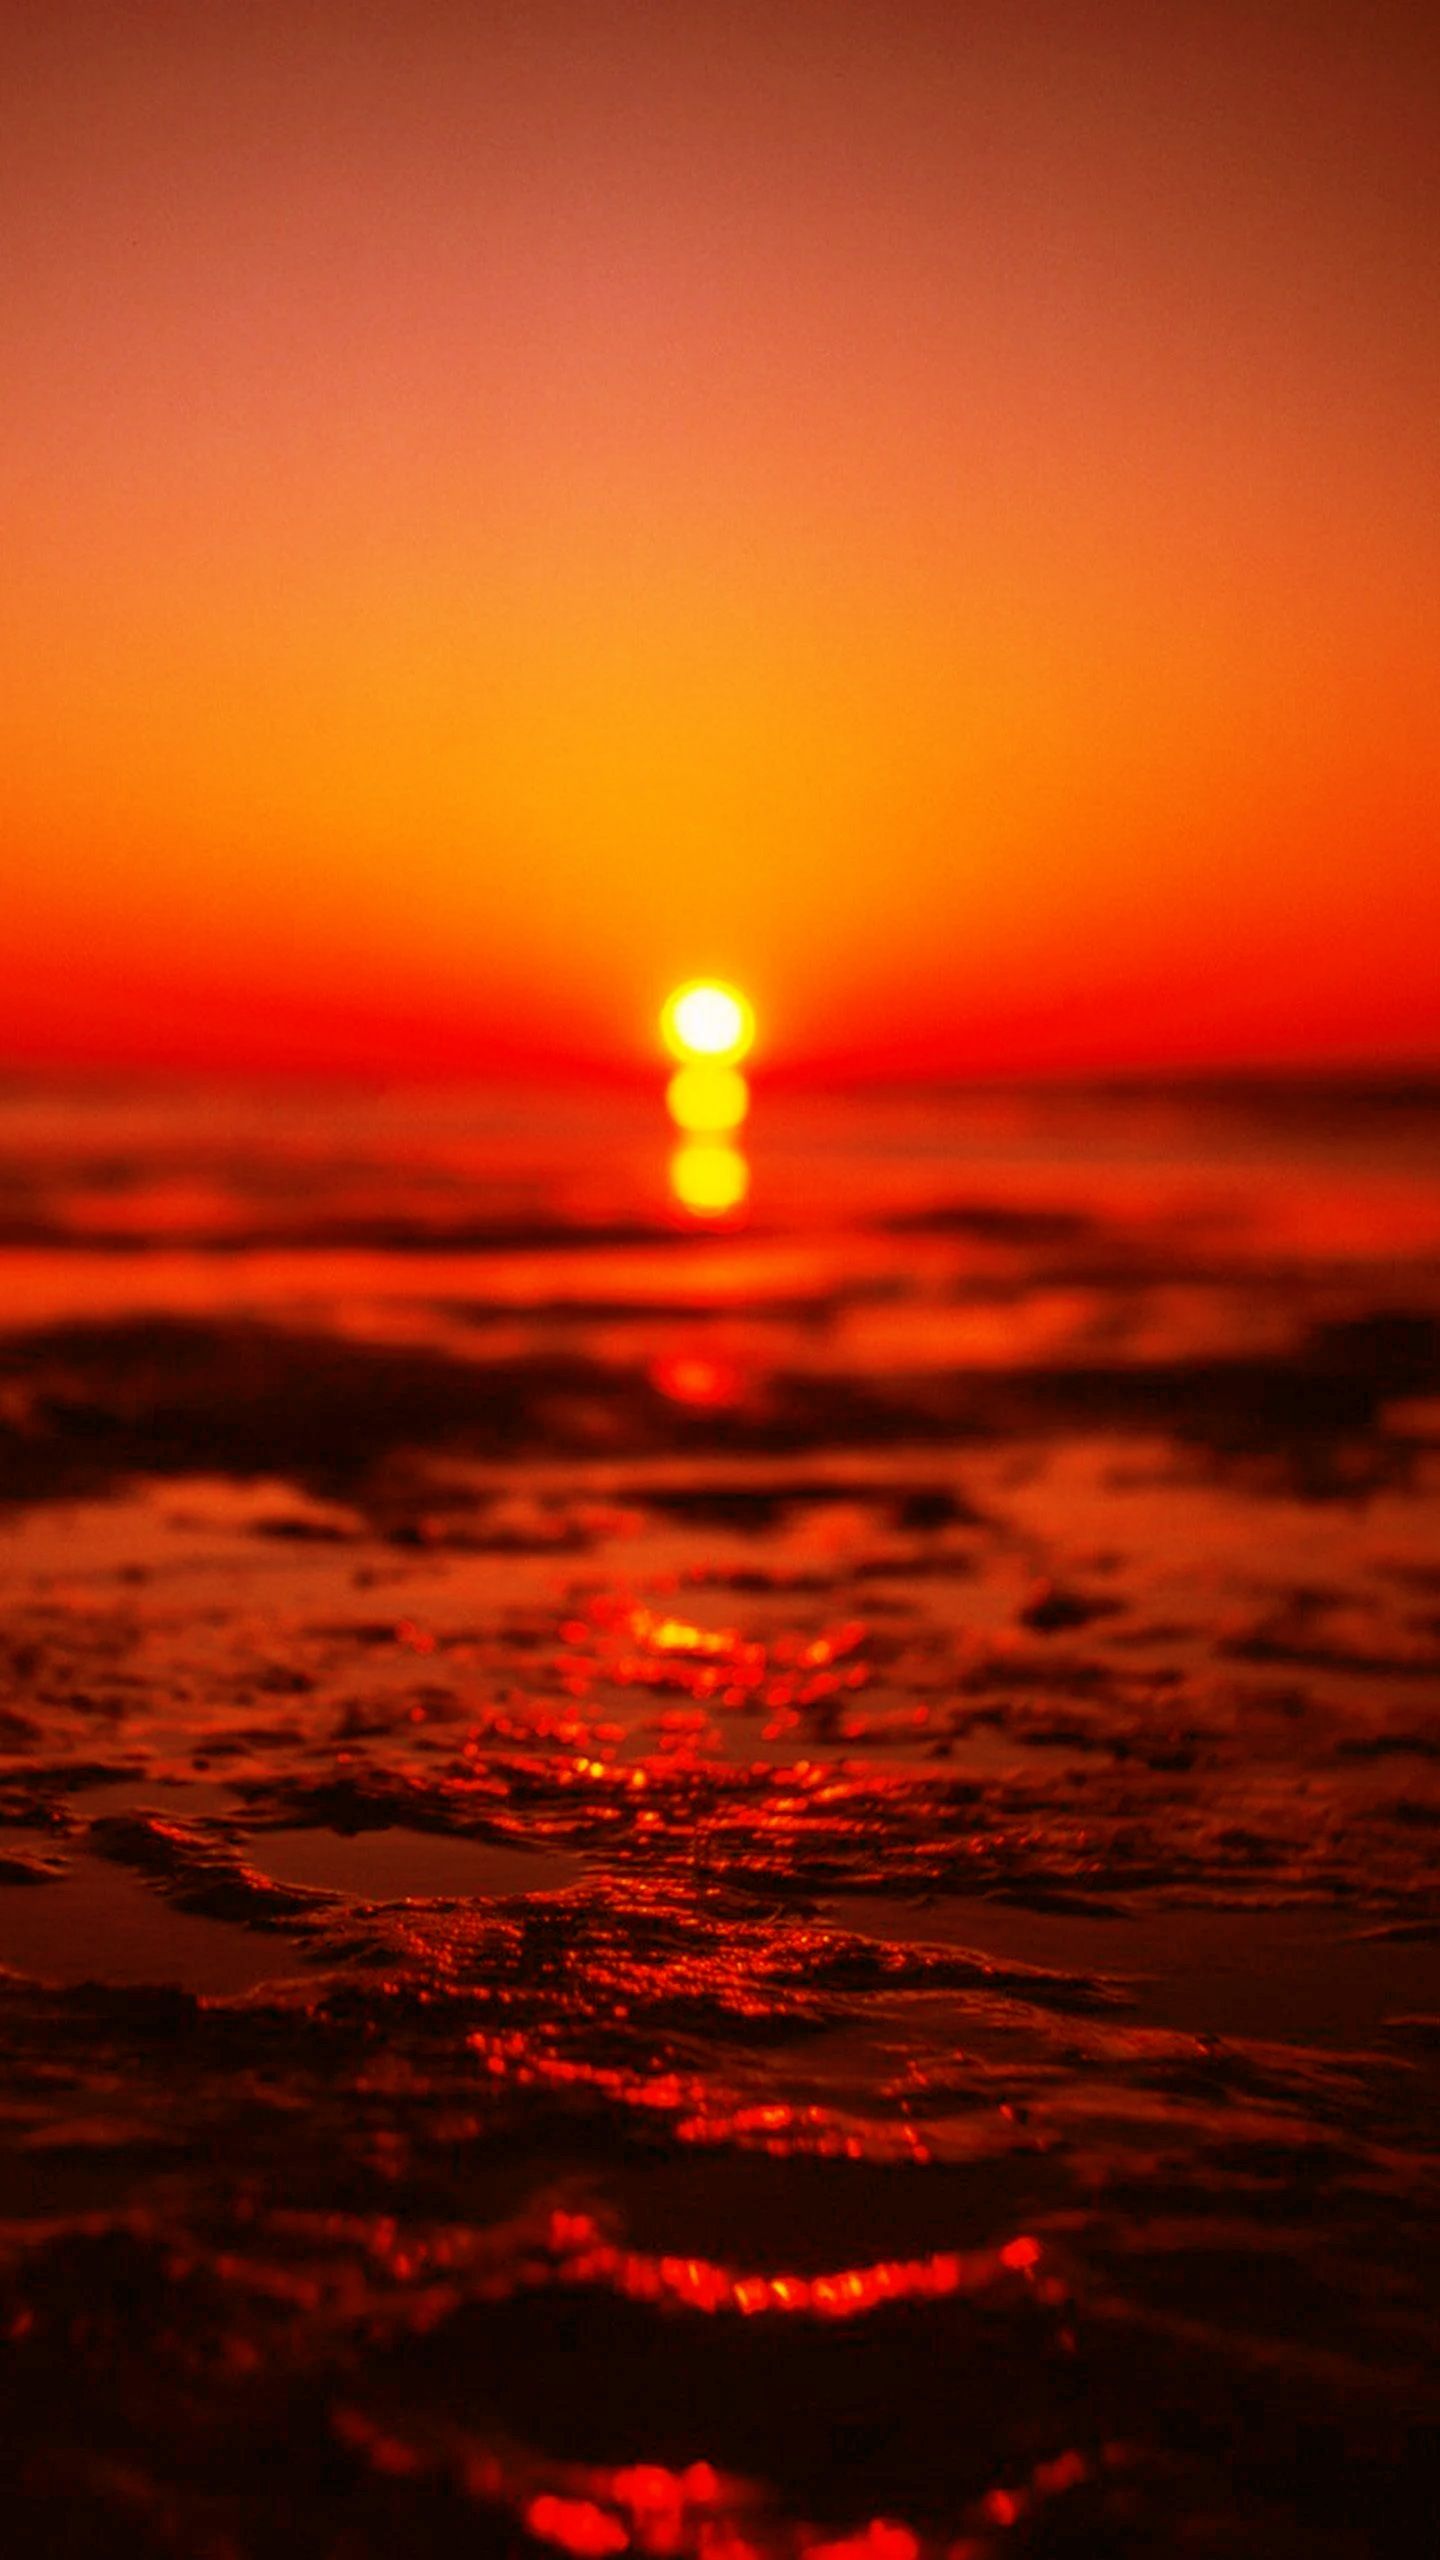 A beautiful sunset over the ocean with the sun setting below the horizon - Sunset